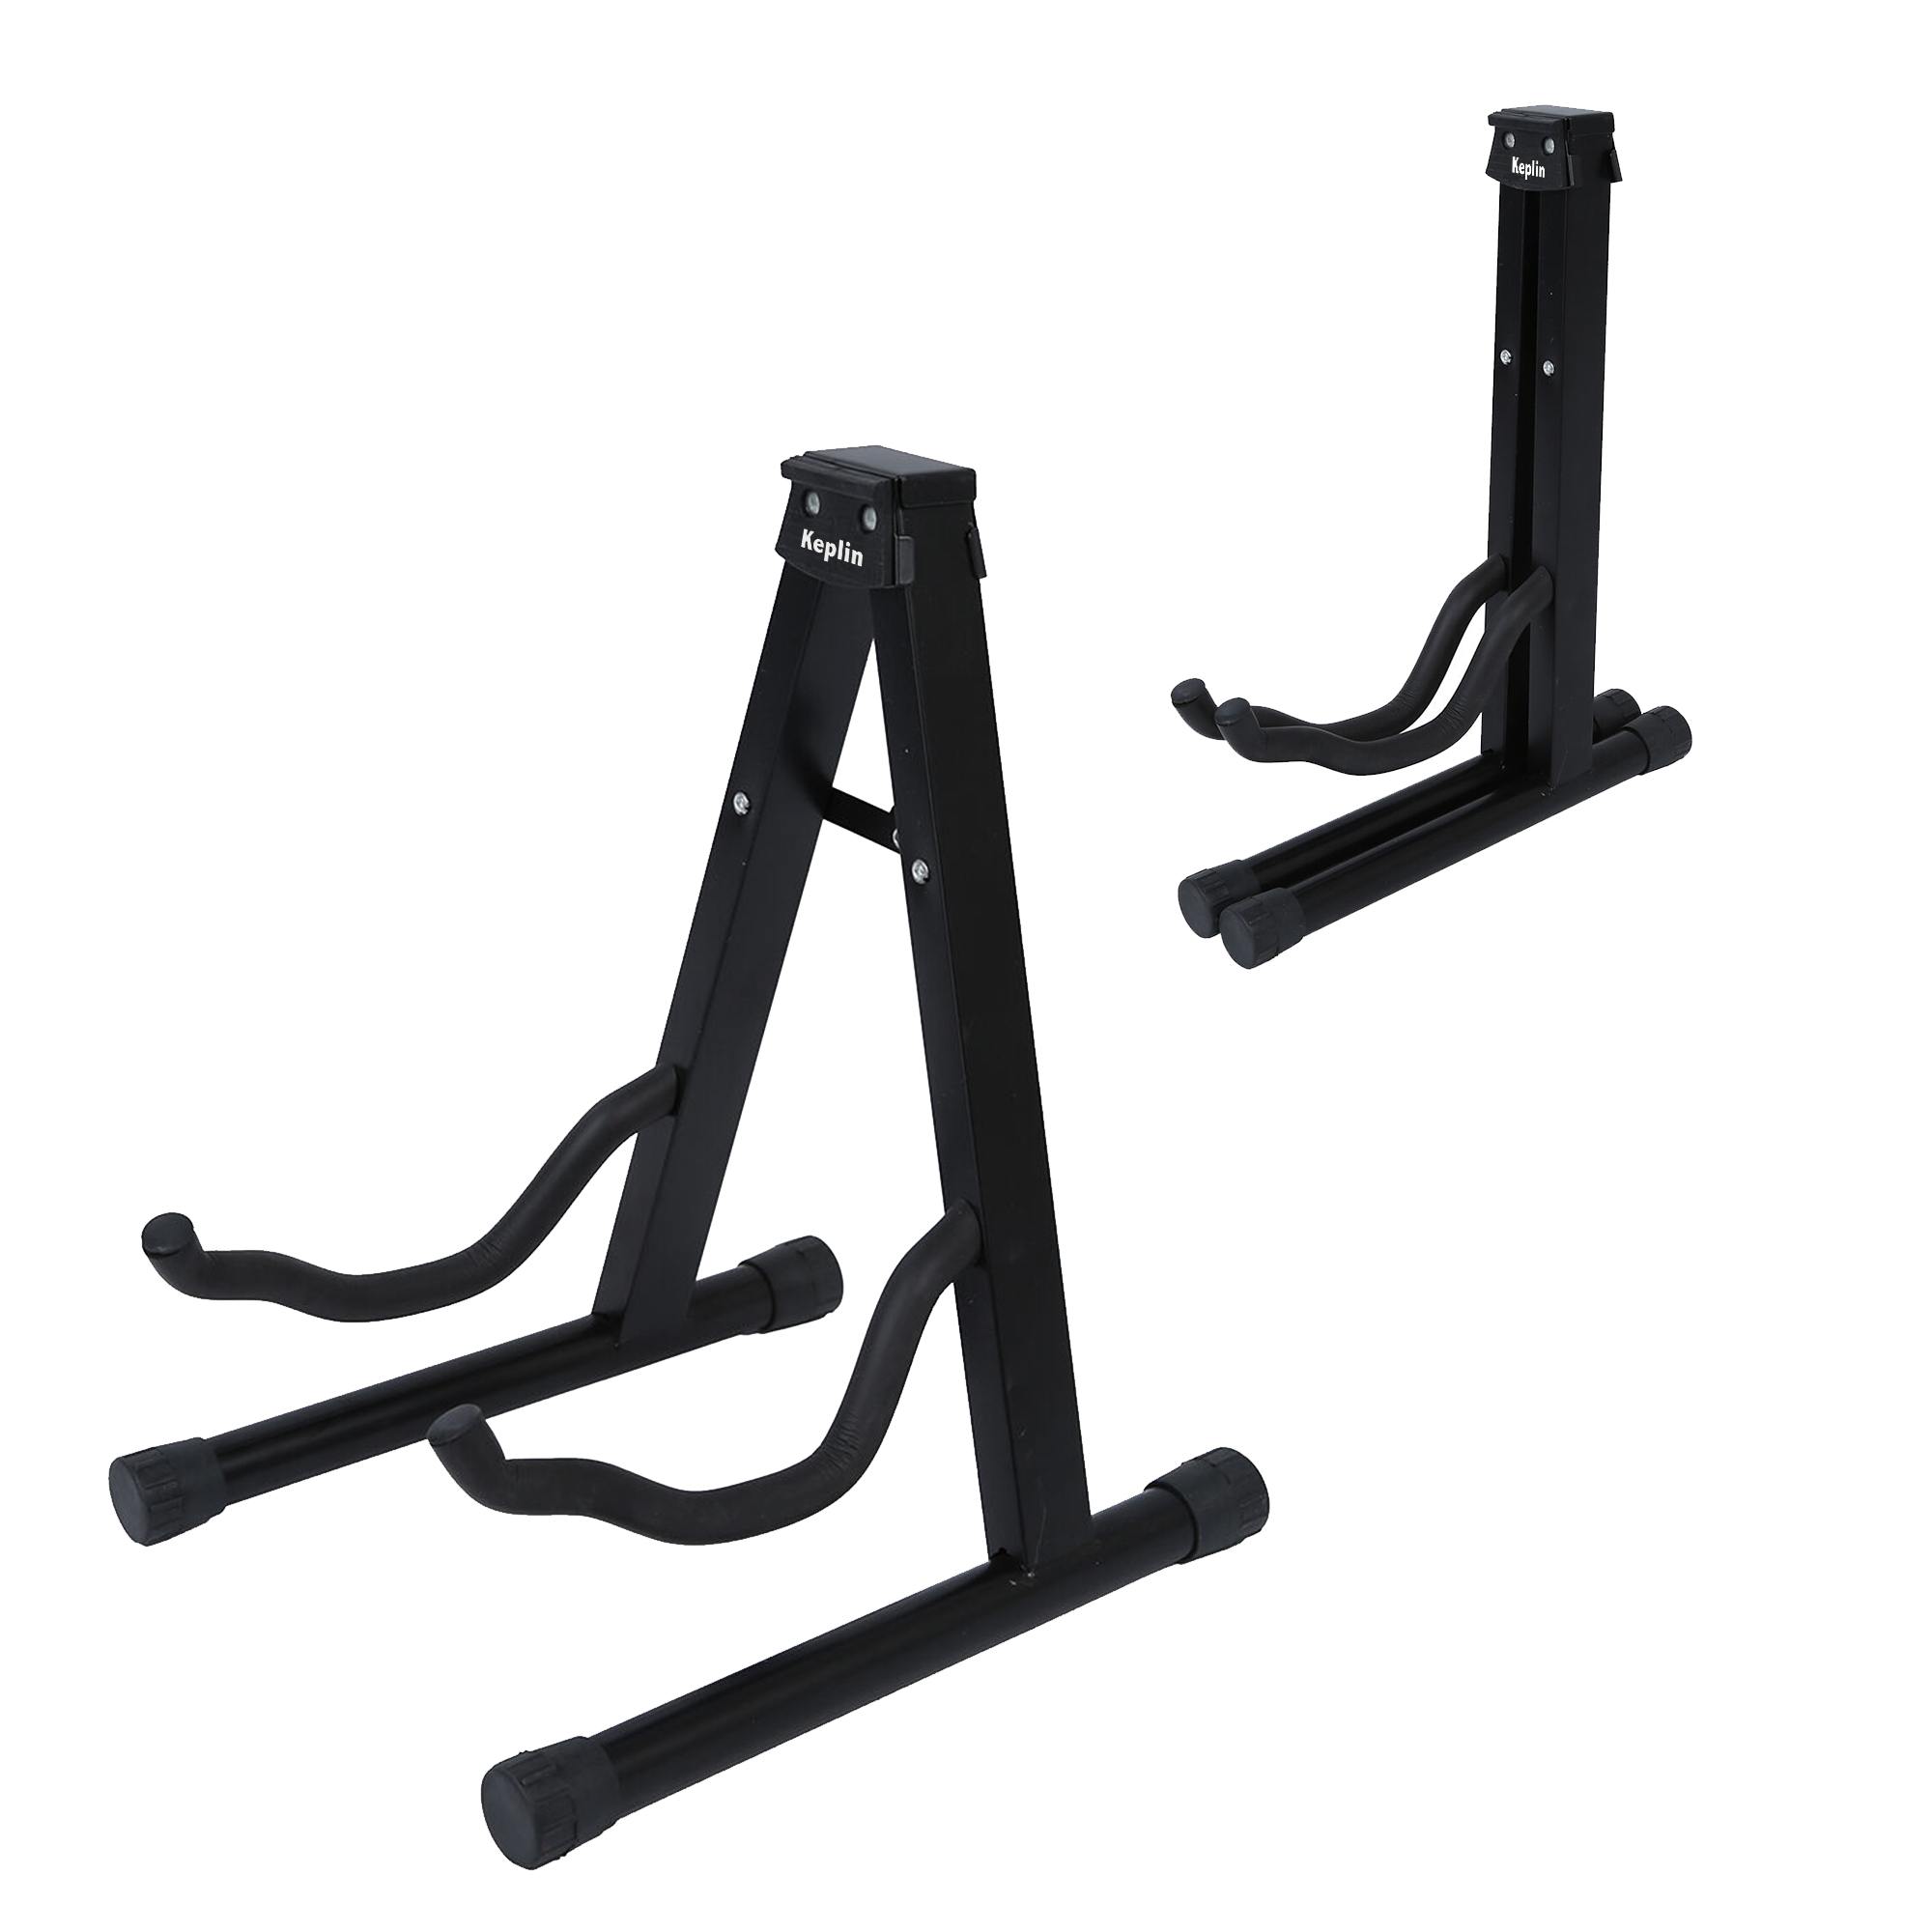 Guitar & Bass Stand A Frame Foldable - Universal, Fits All Guitars, Acoustic & Electric